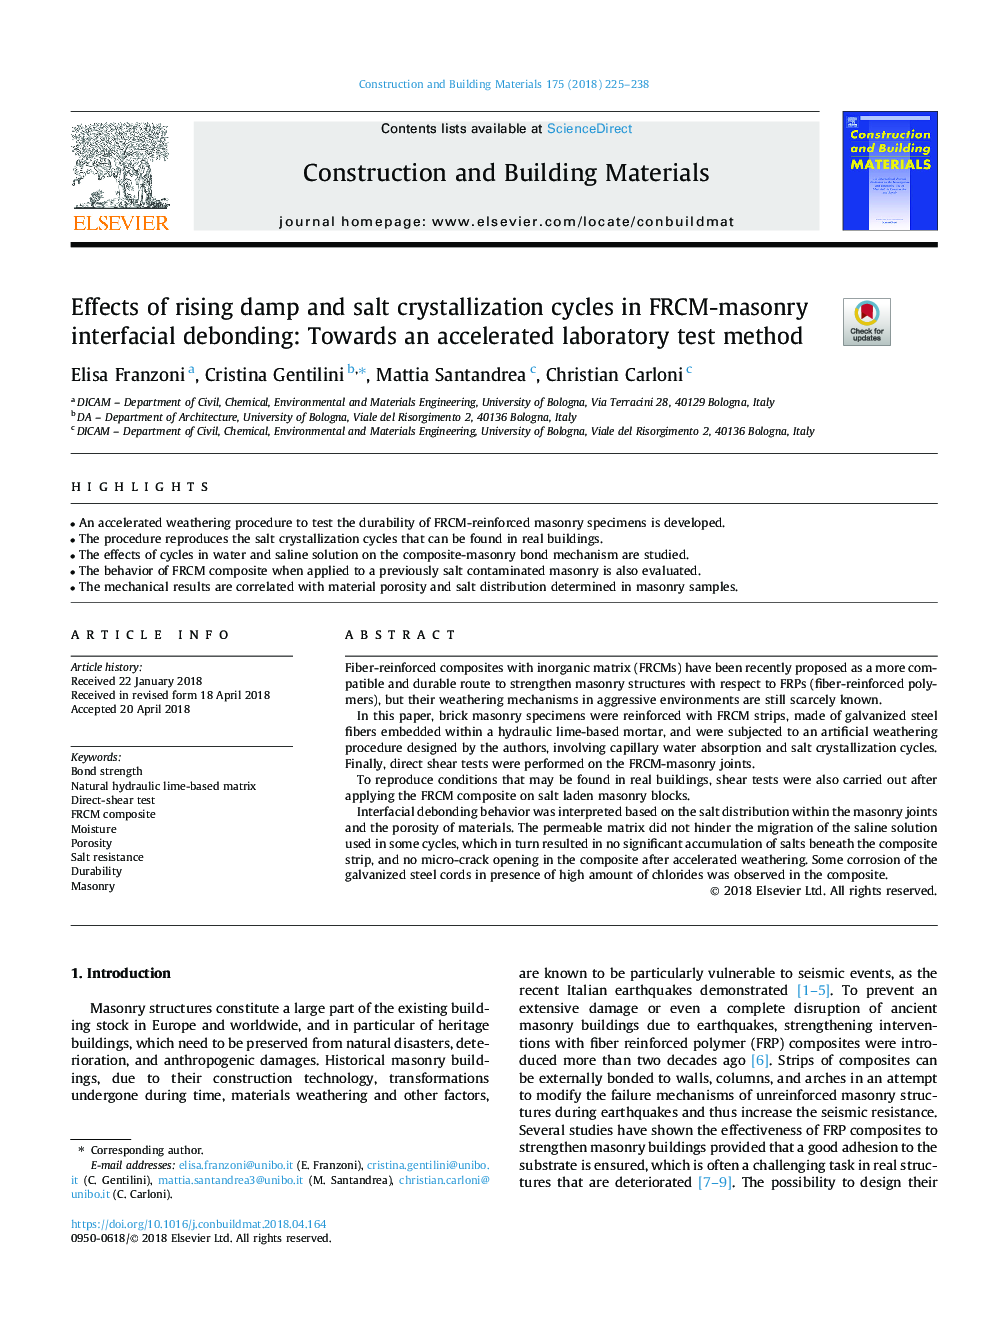 Effects of rising damp and salt crystallization cycles in FRCM-masonry interfacial debonding: Towards an accelerated laboratory test method